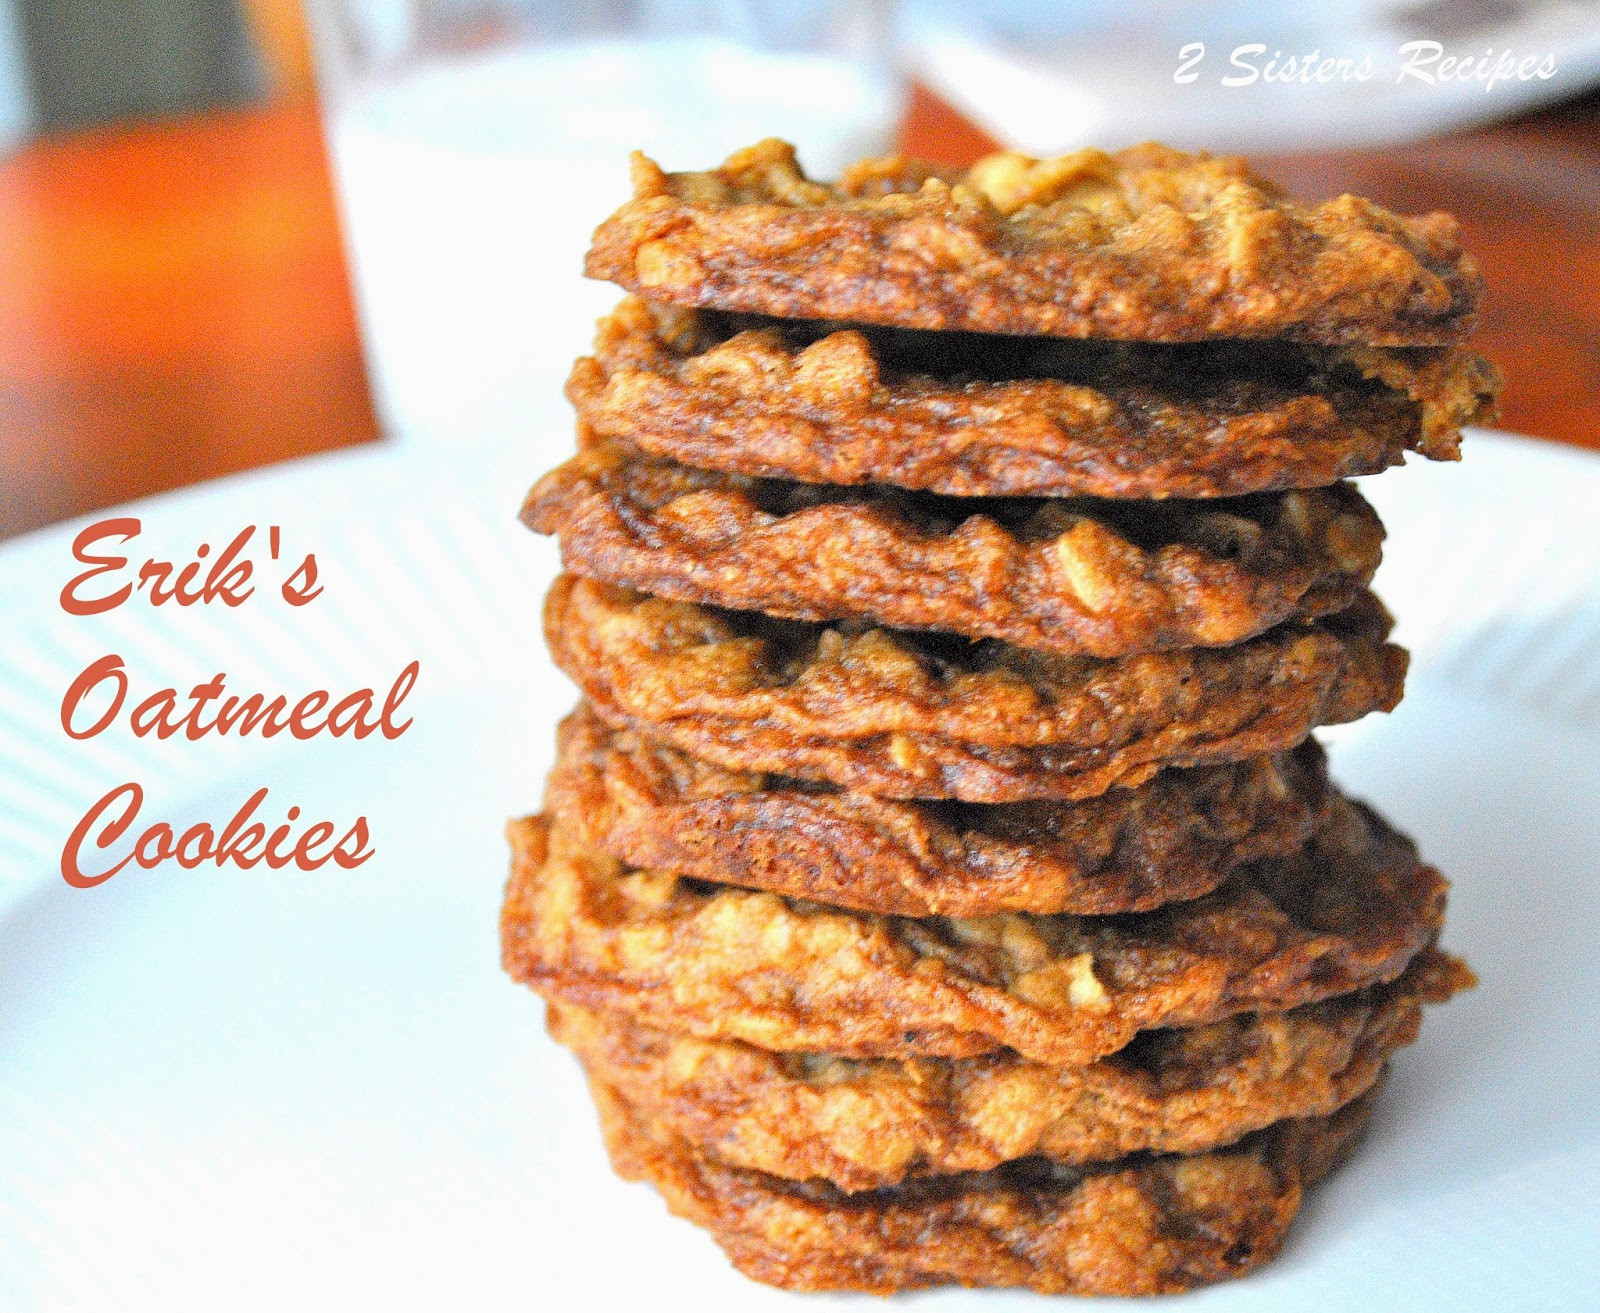 Oatmeal Cookies For Two
 Erik s Oatmeal Cookies 2 Sisters Recipes by Anna and Liz